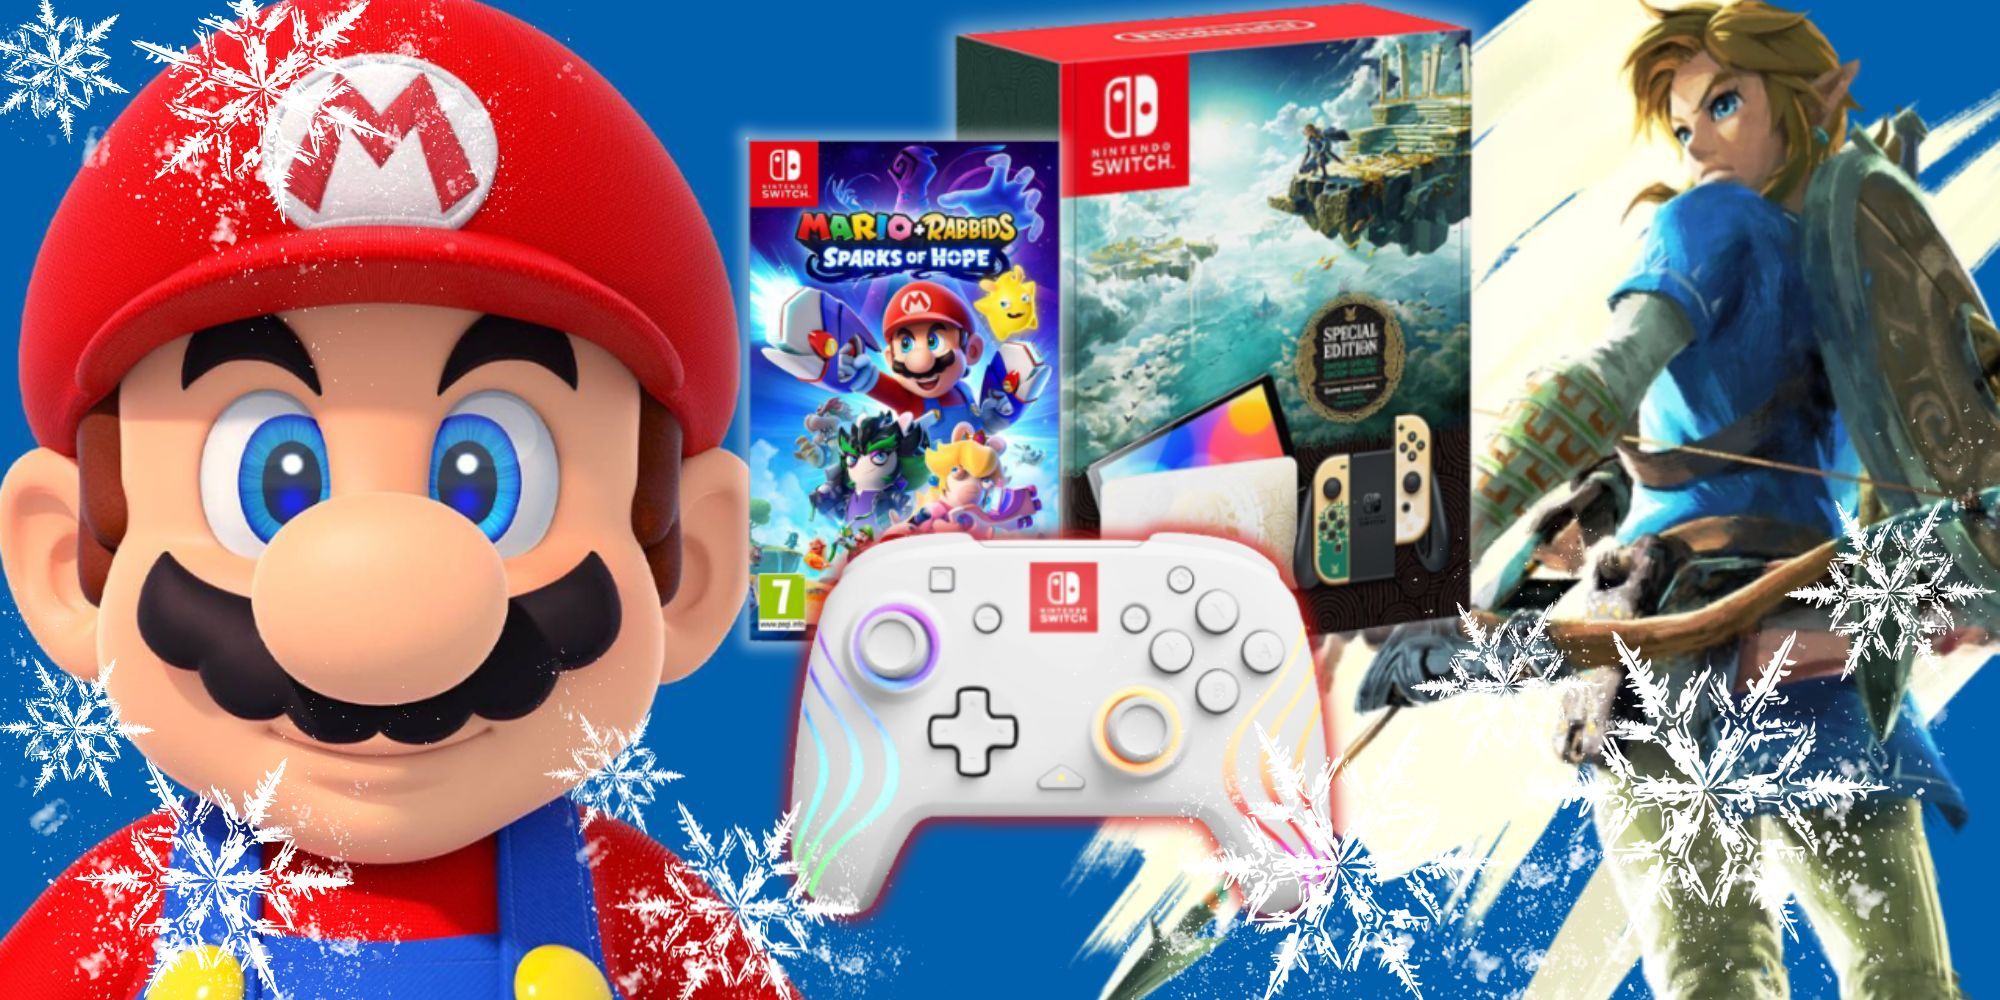 Collage image of Nintendo Switch consoles & games with Mario and Link either side and added snowflakes 